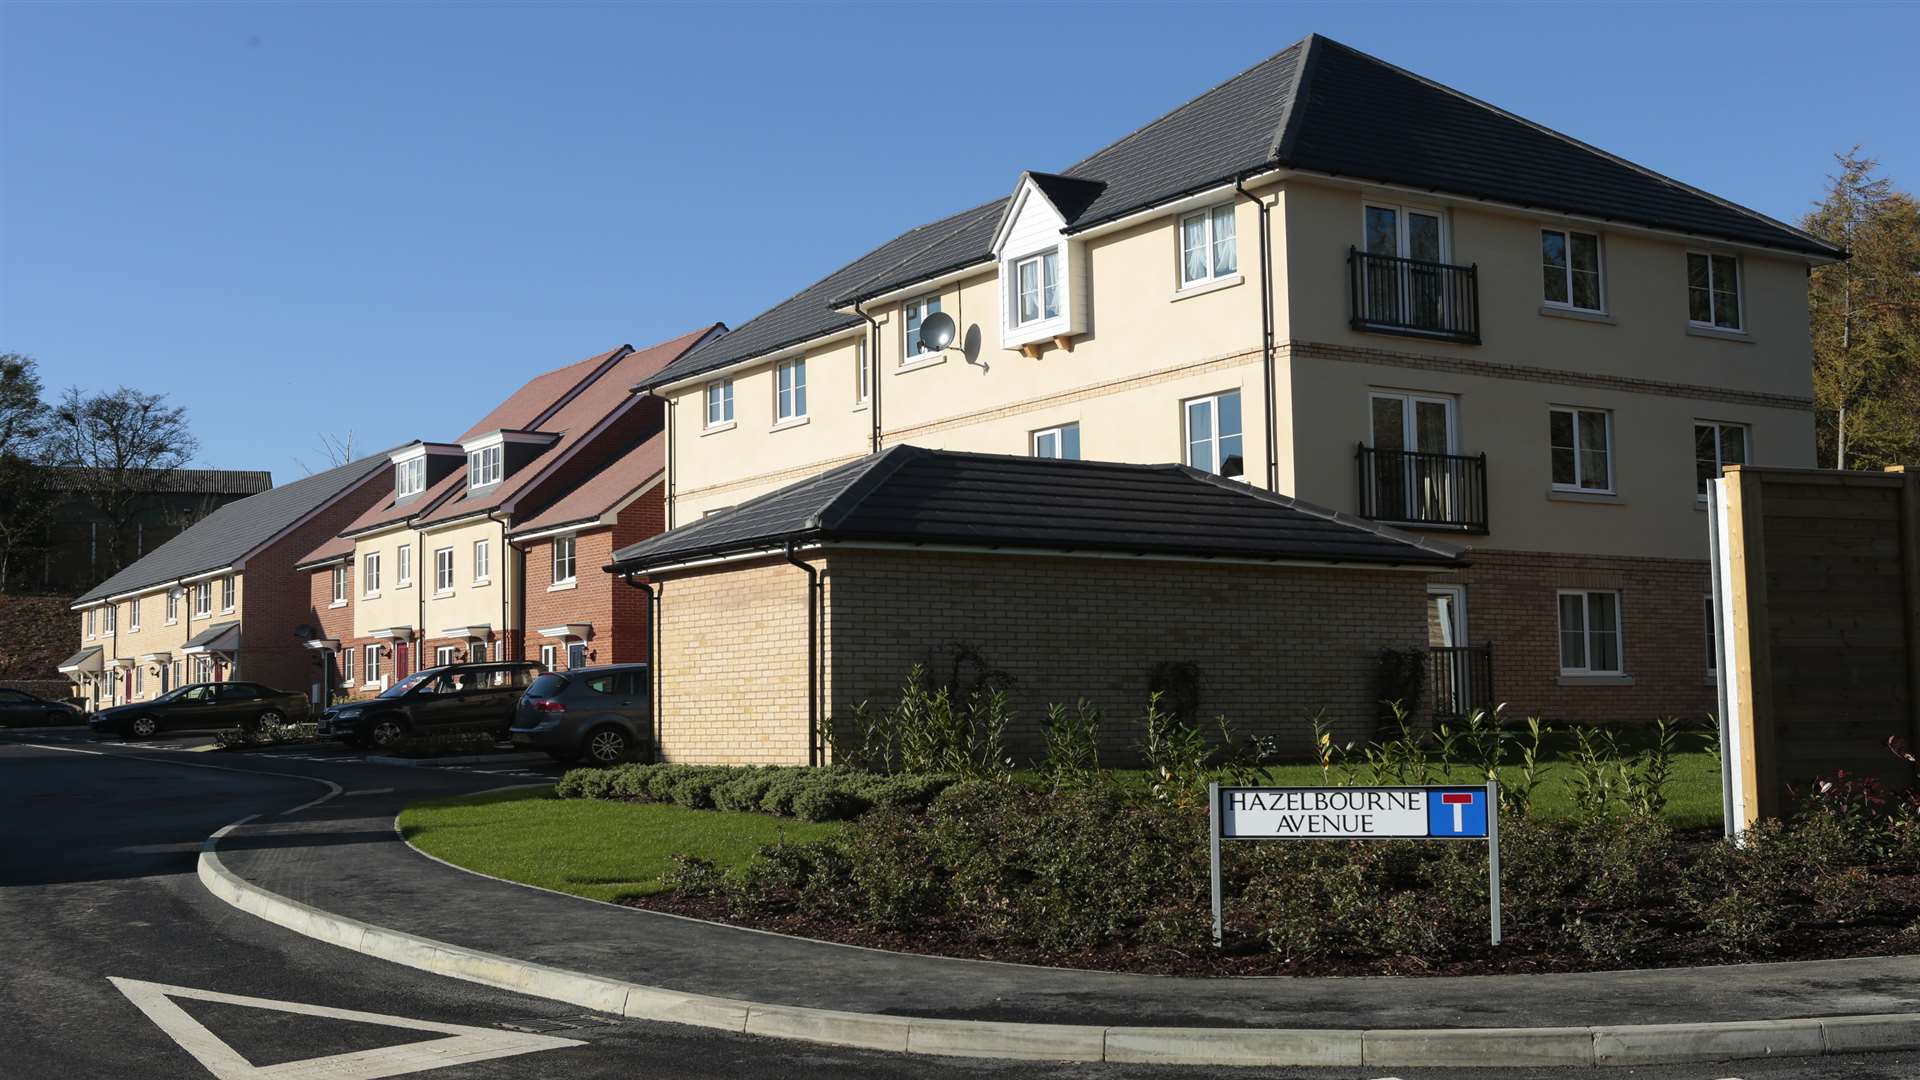 Hundreds of new homes have been developed at the former quarry site in Borough Green